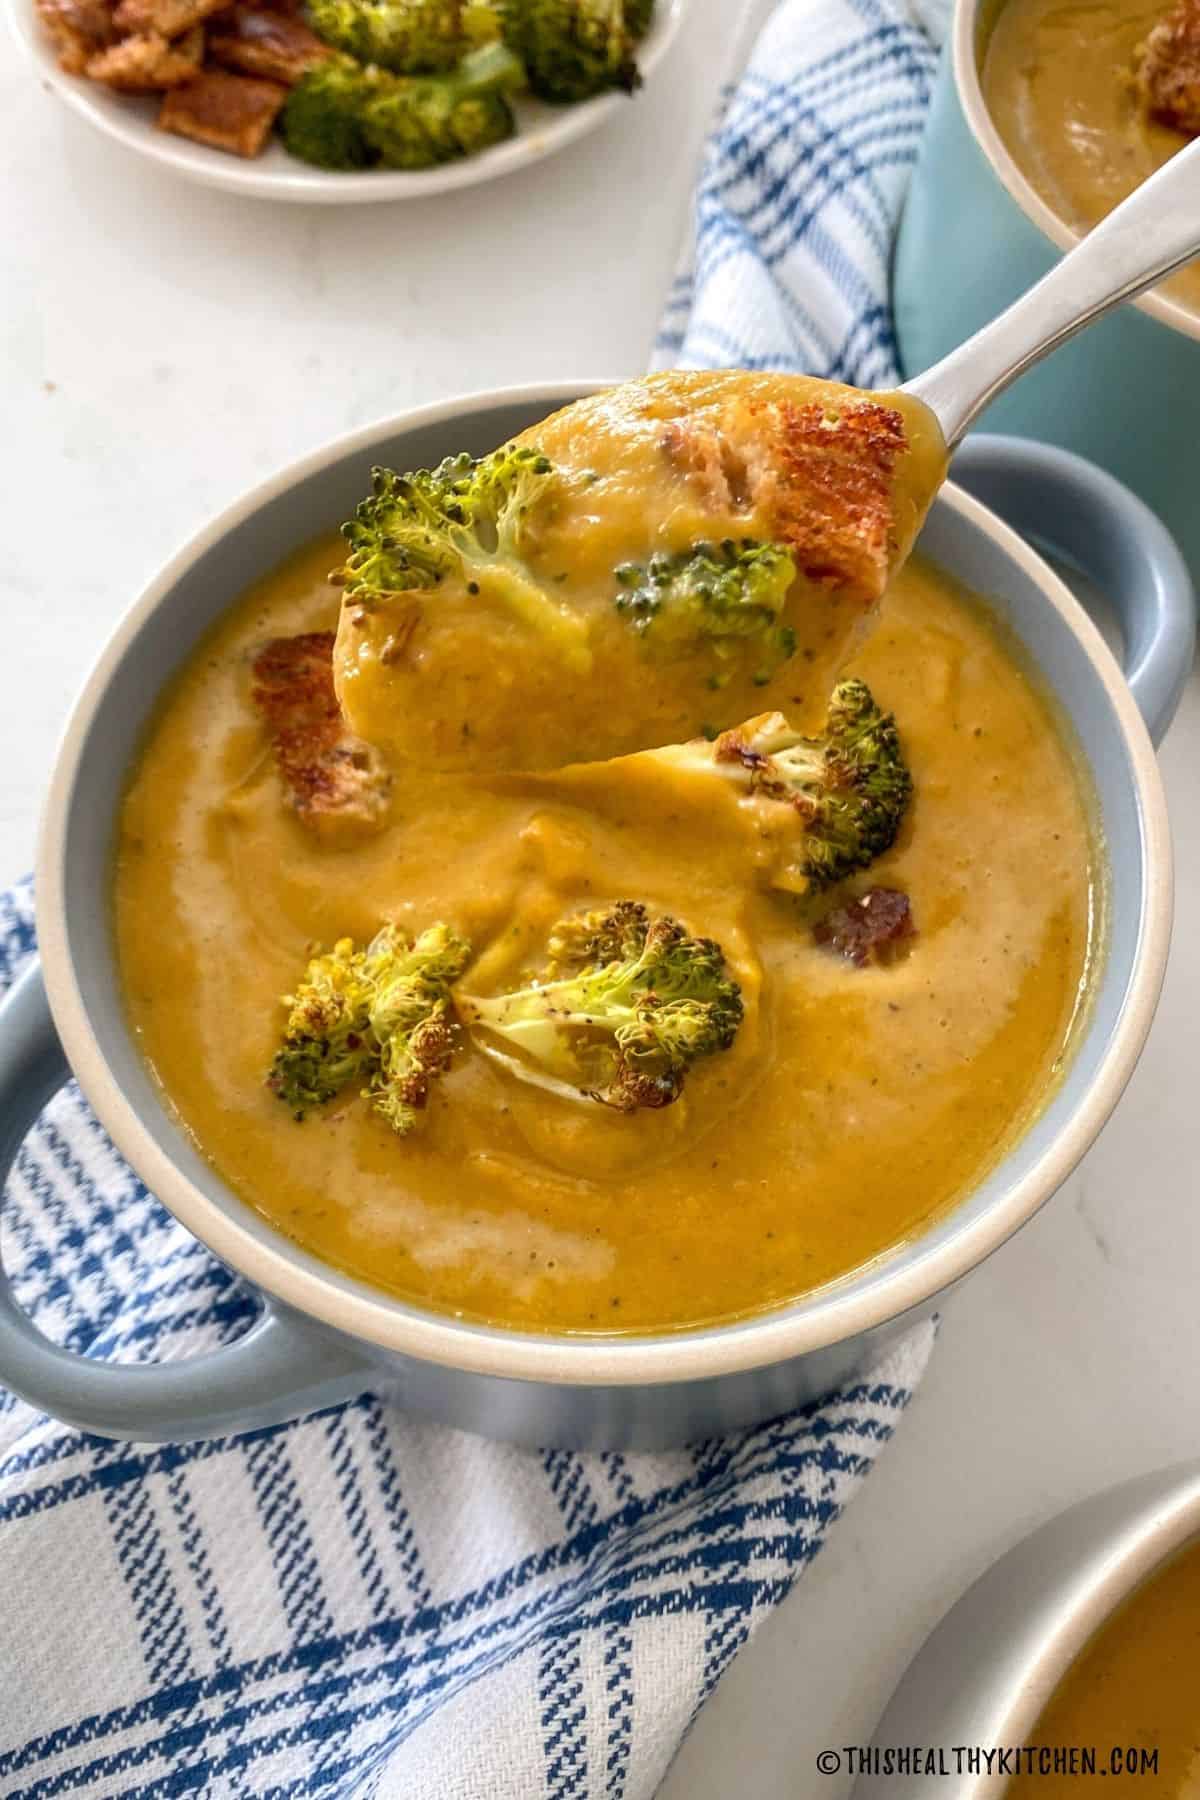 Spoon of broccoli sweet potato soup being lifted over bowl of soup.